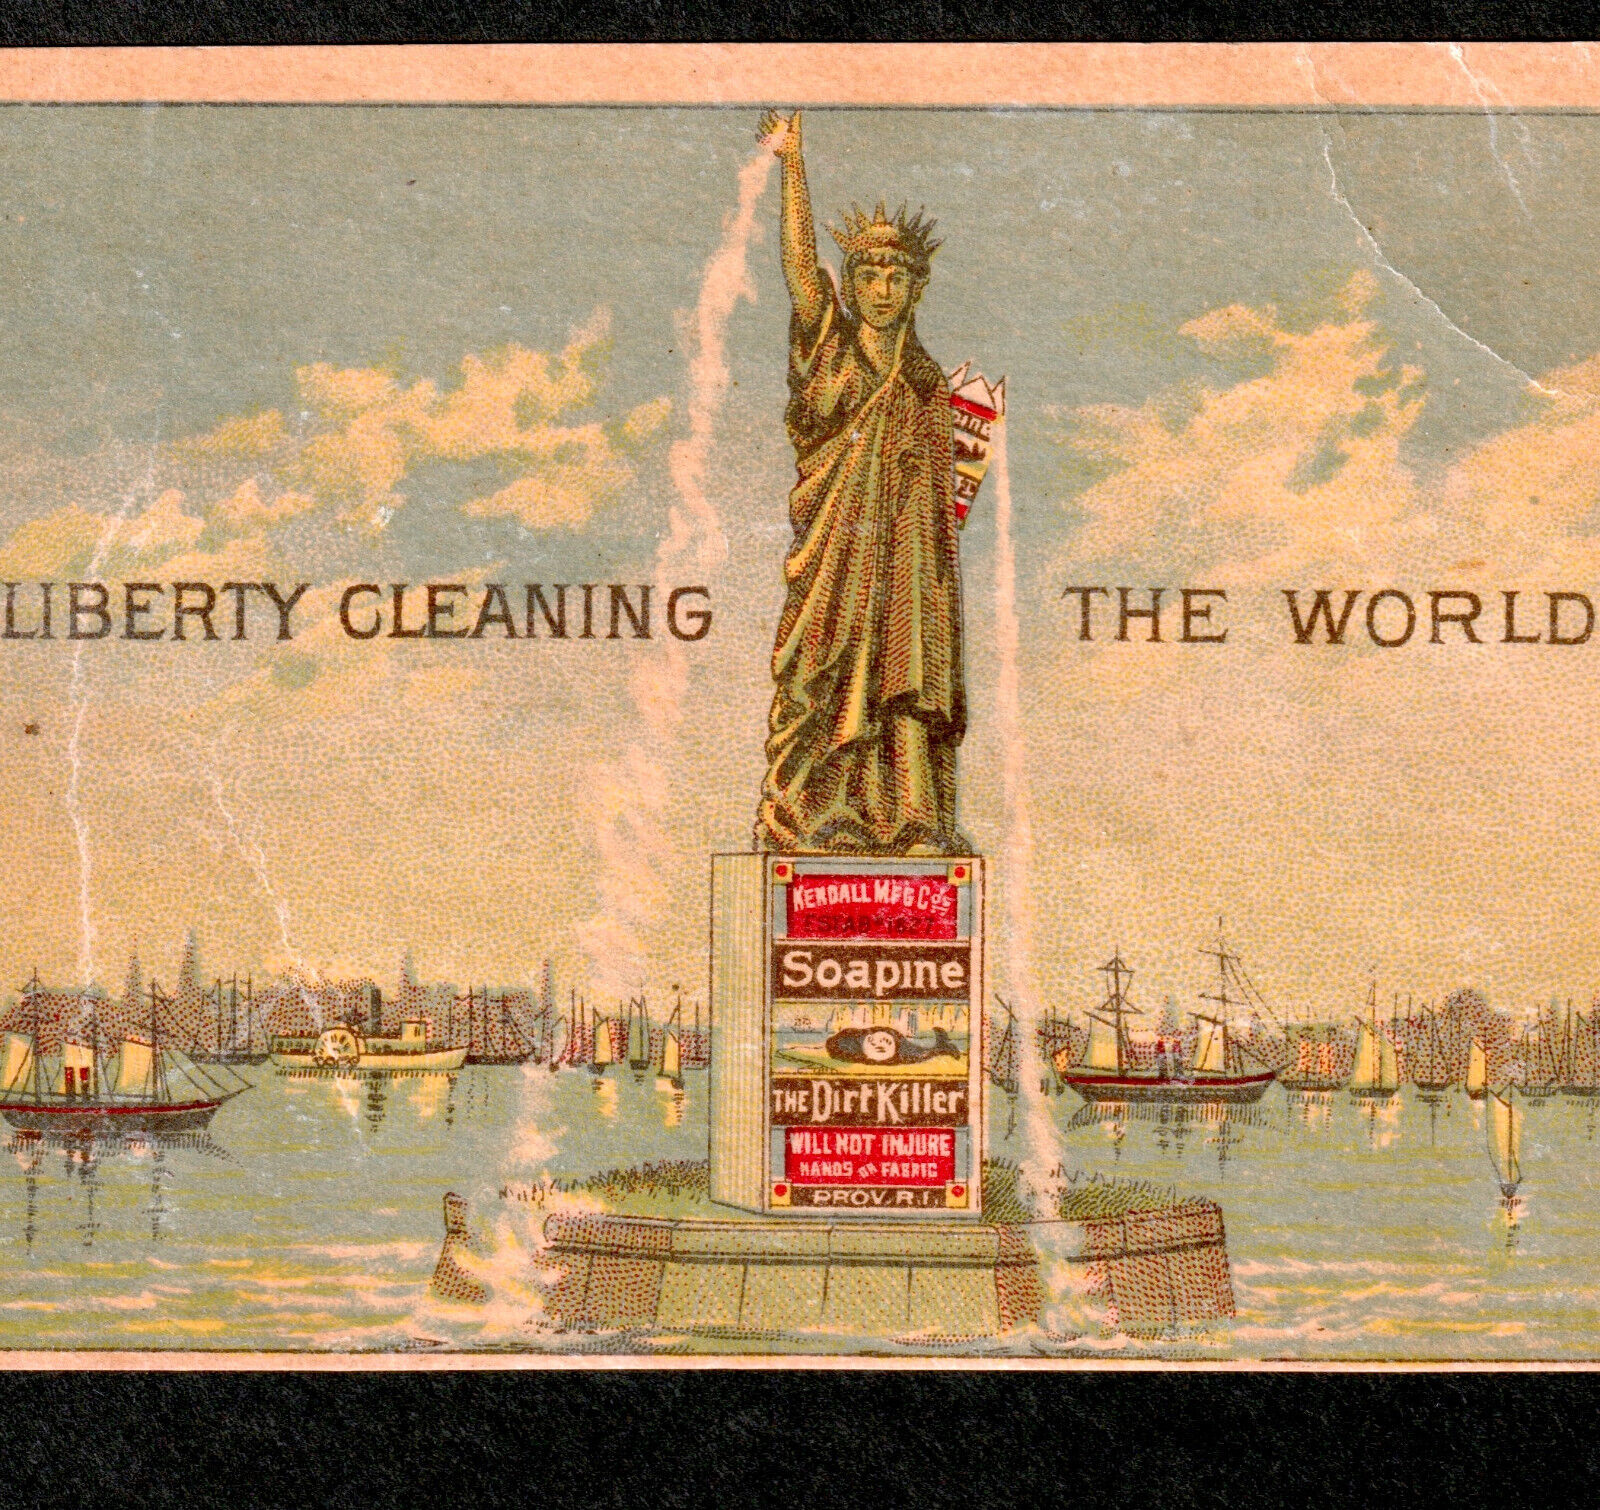 1800s Statue of Liberty Cleaning World Soapine Soap Fantasy Victorian Trade Card